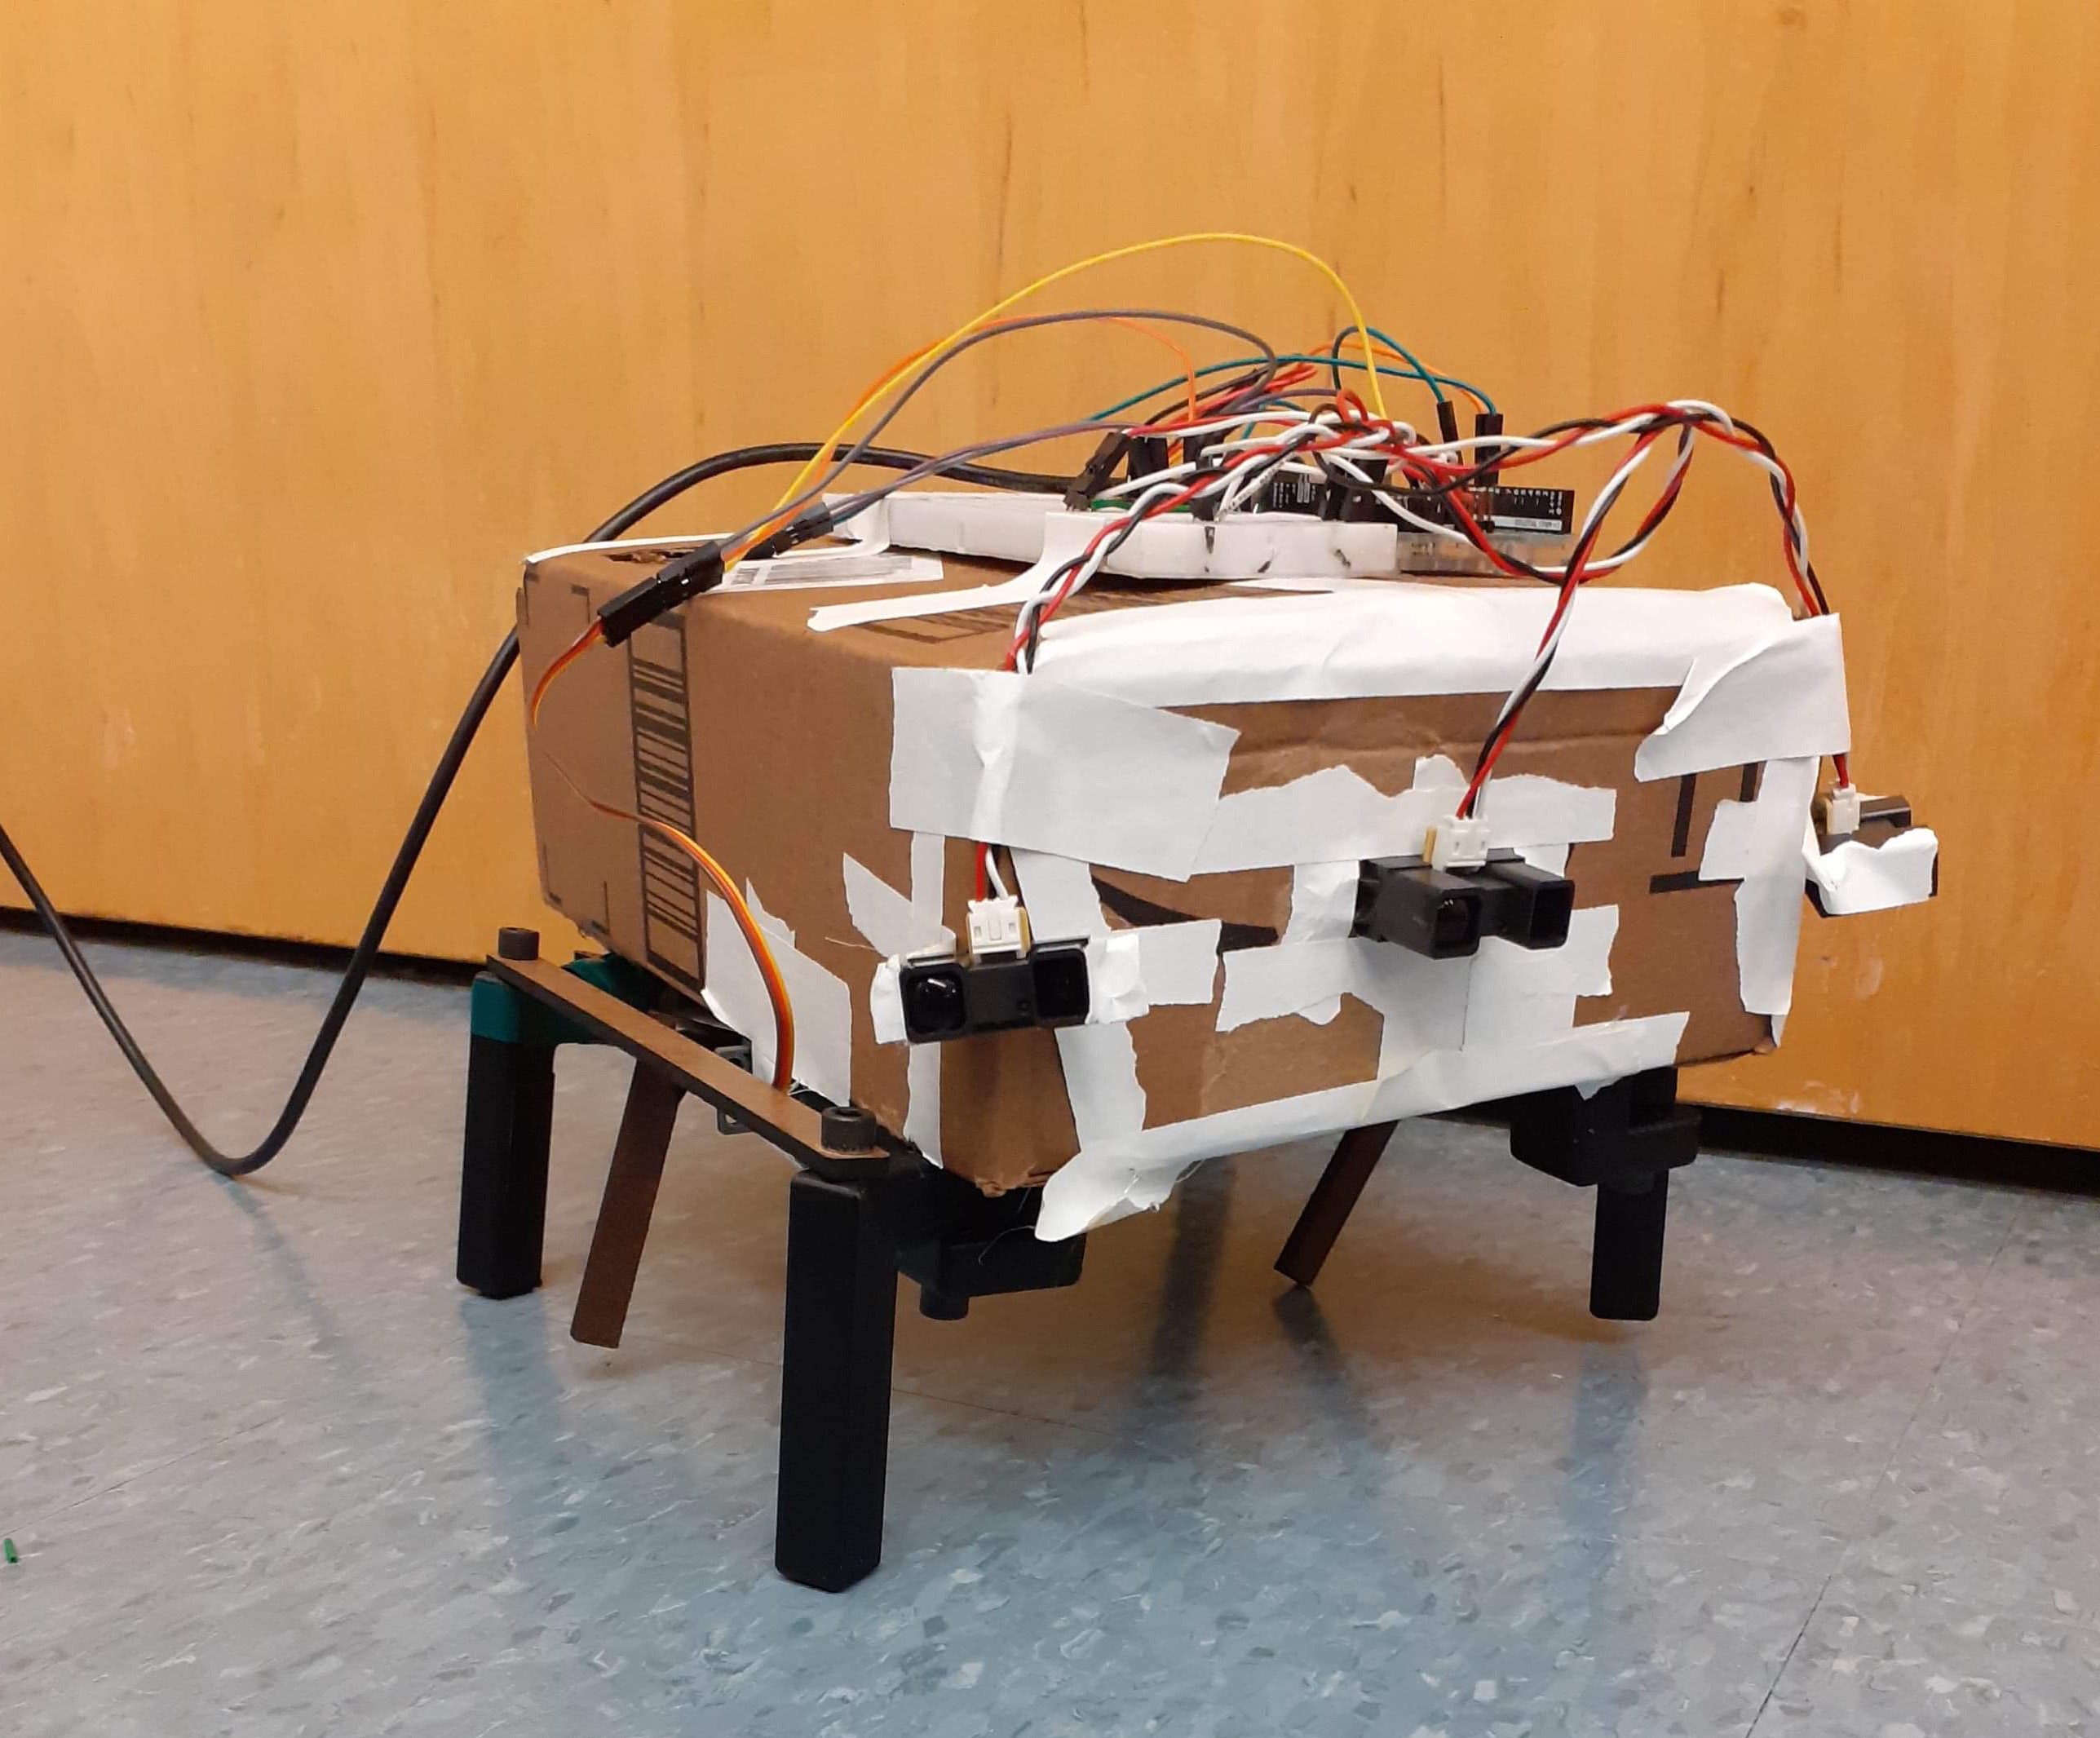 robot presented at review 1